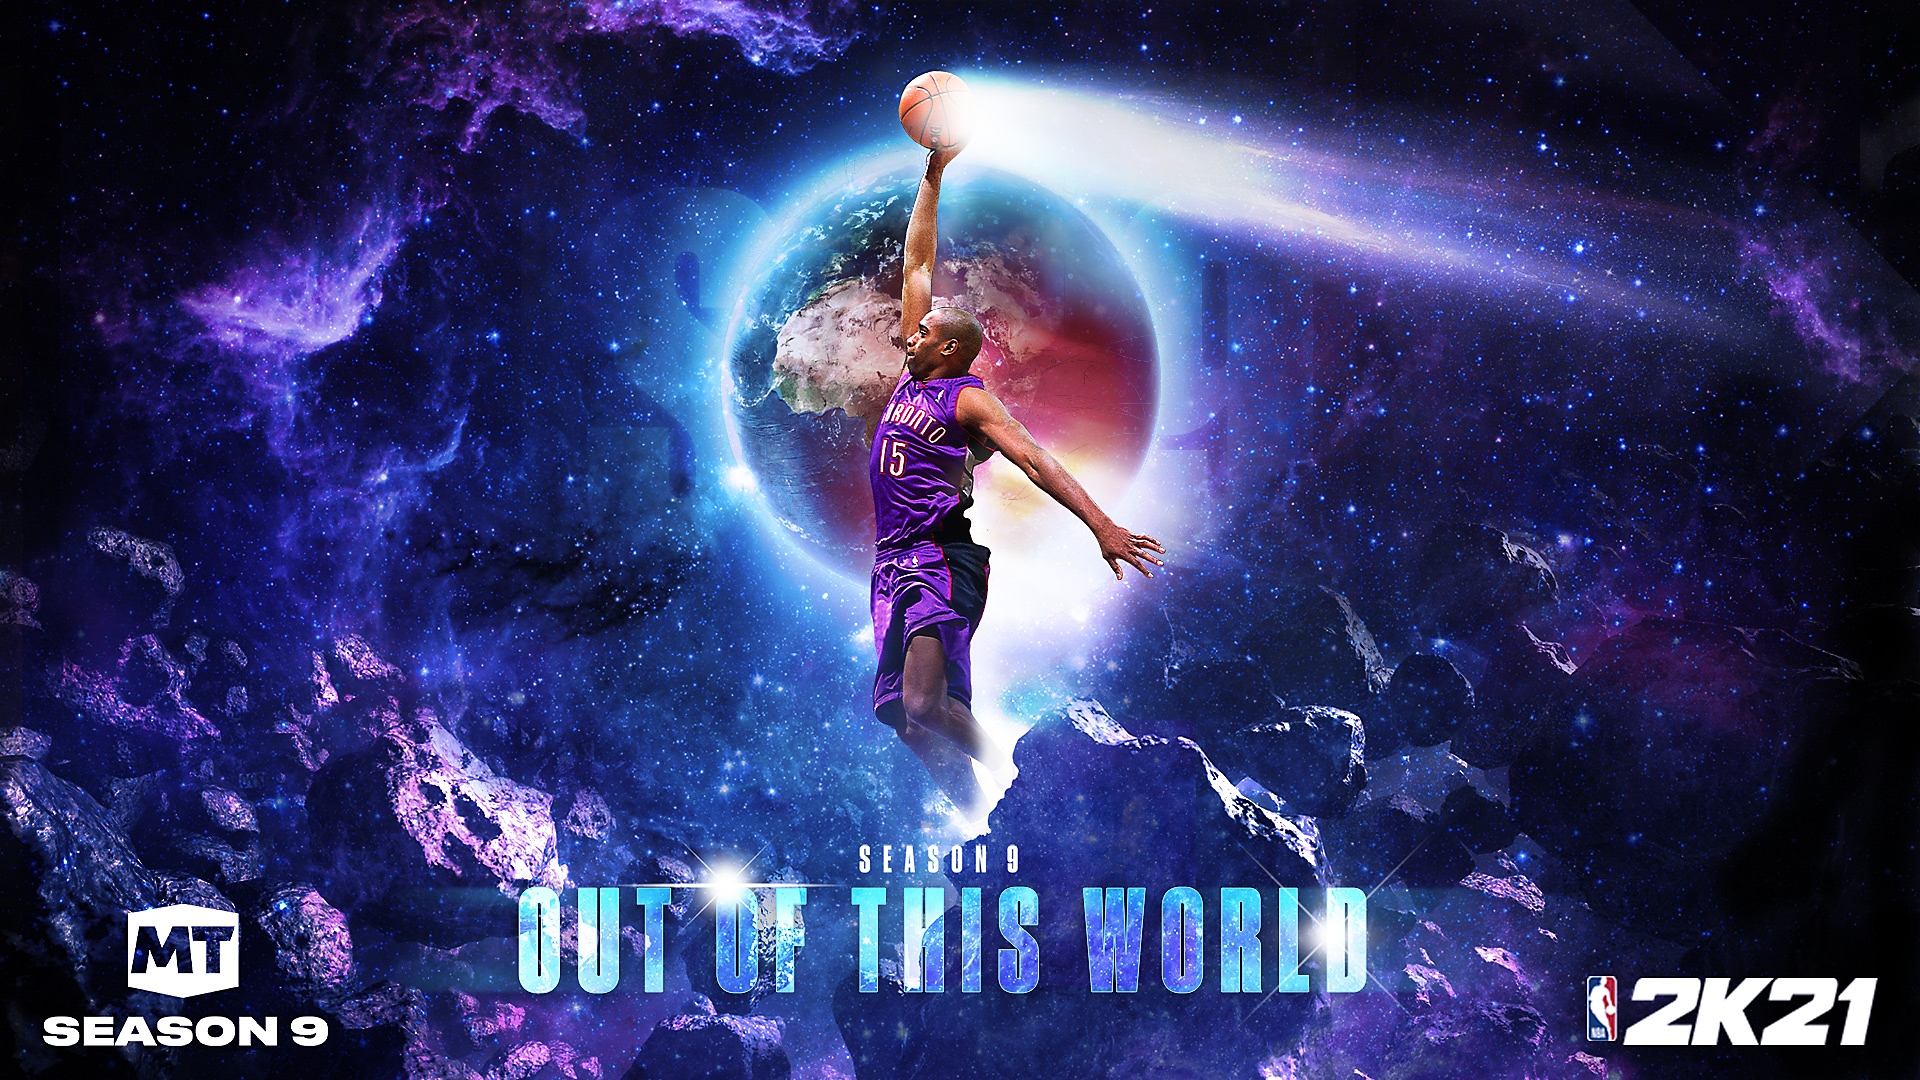 NBA 2K21 – MyTEAM Season 9: Out of this World − promotaide